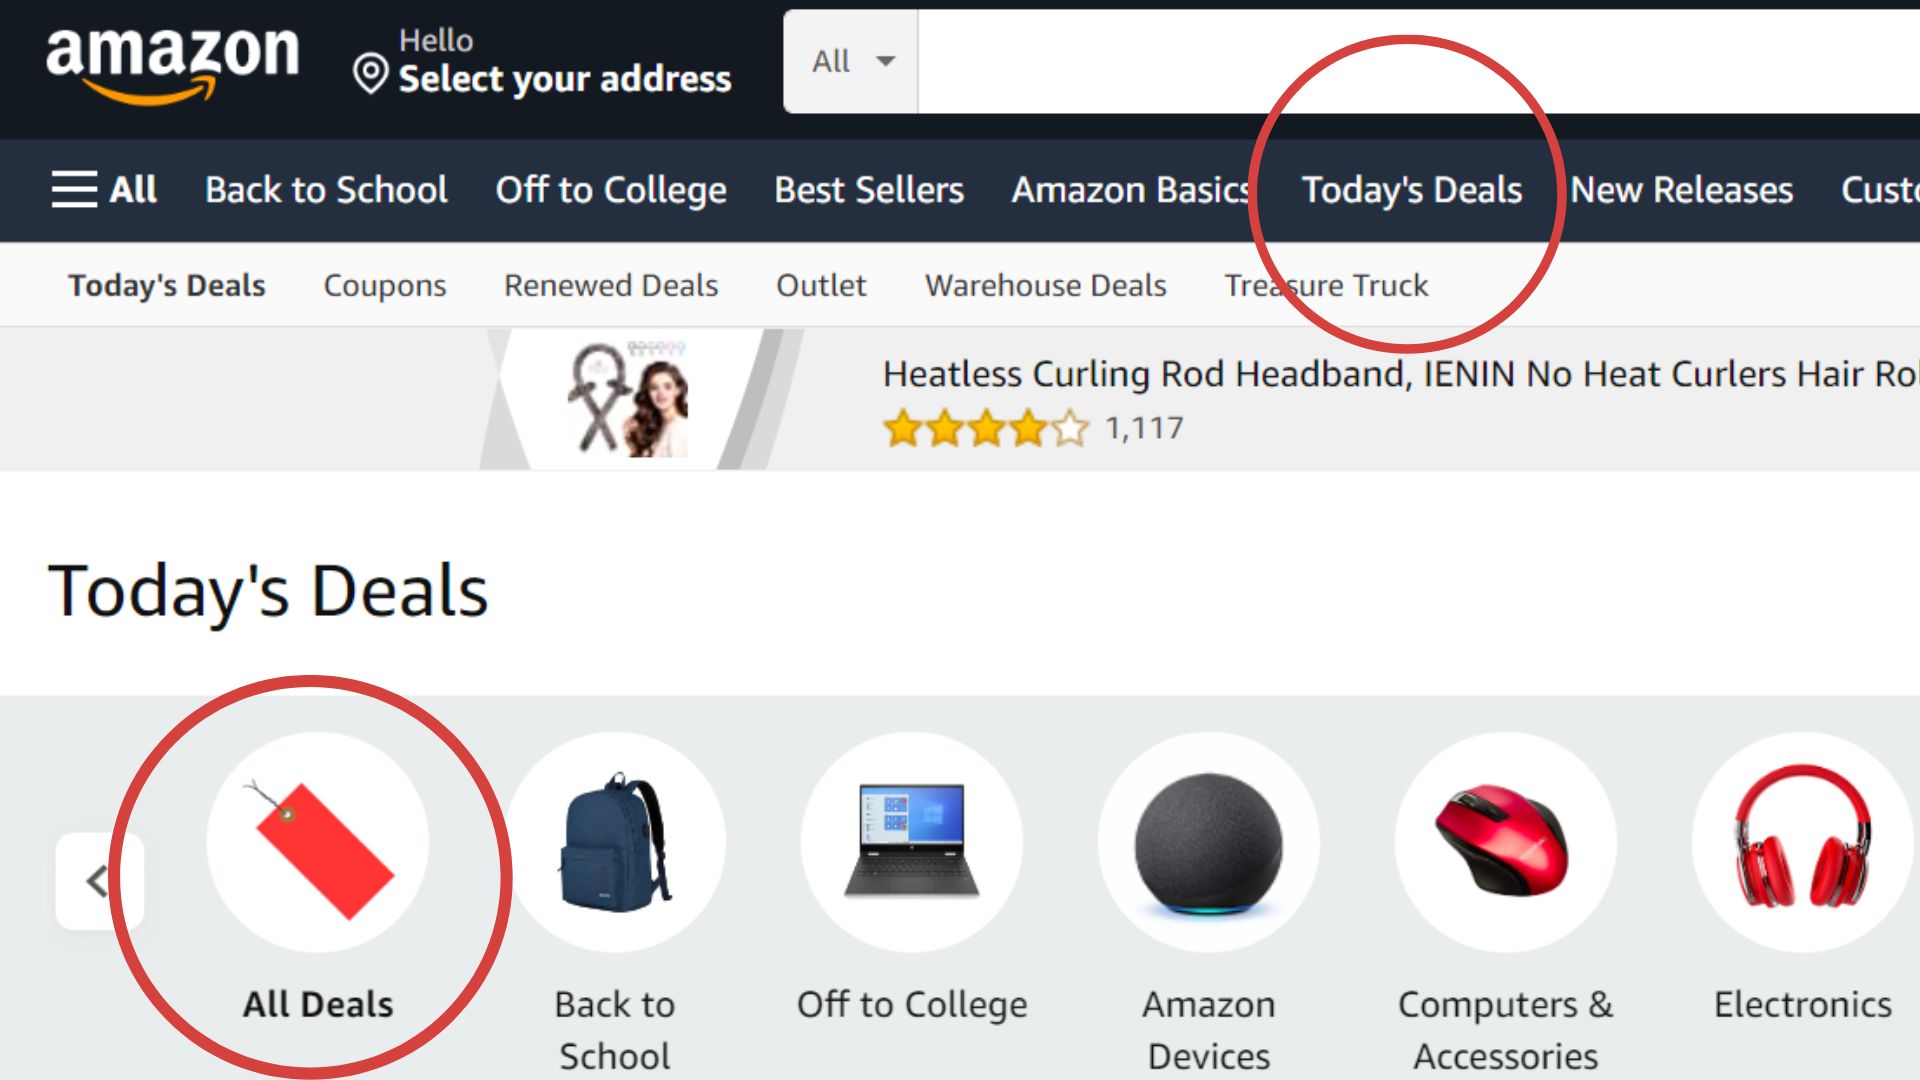 Lightning Deals: Everything Sellers Need to Know